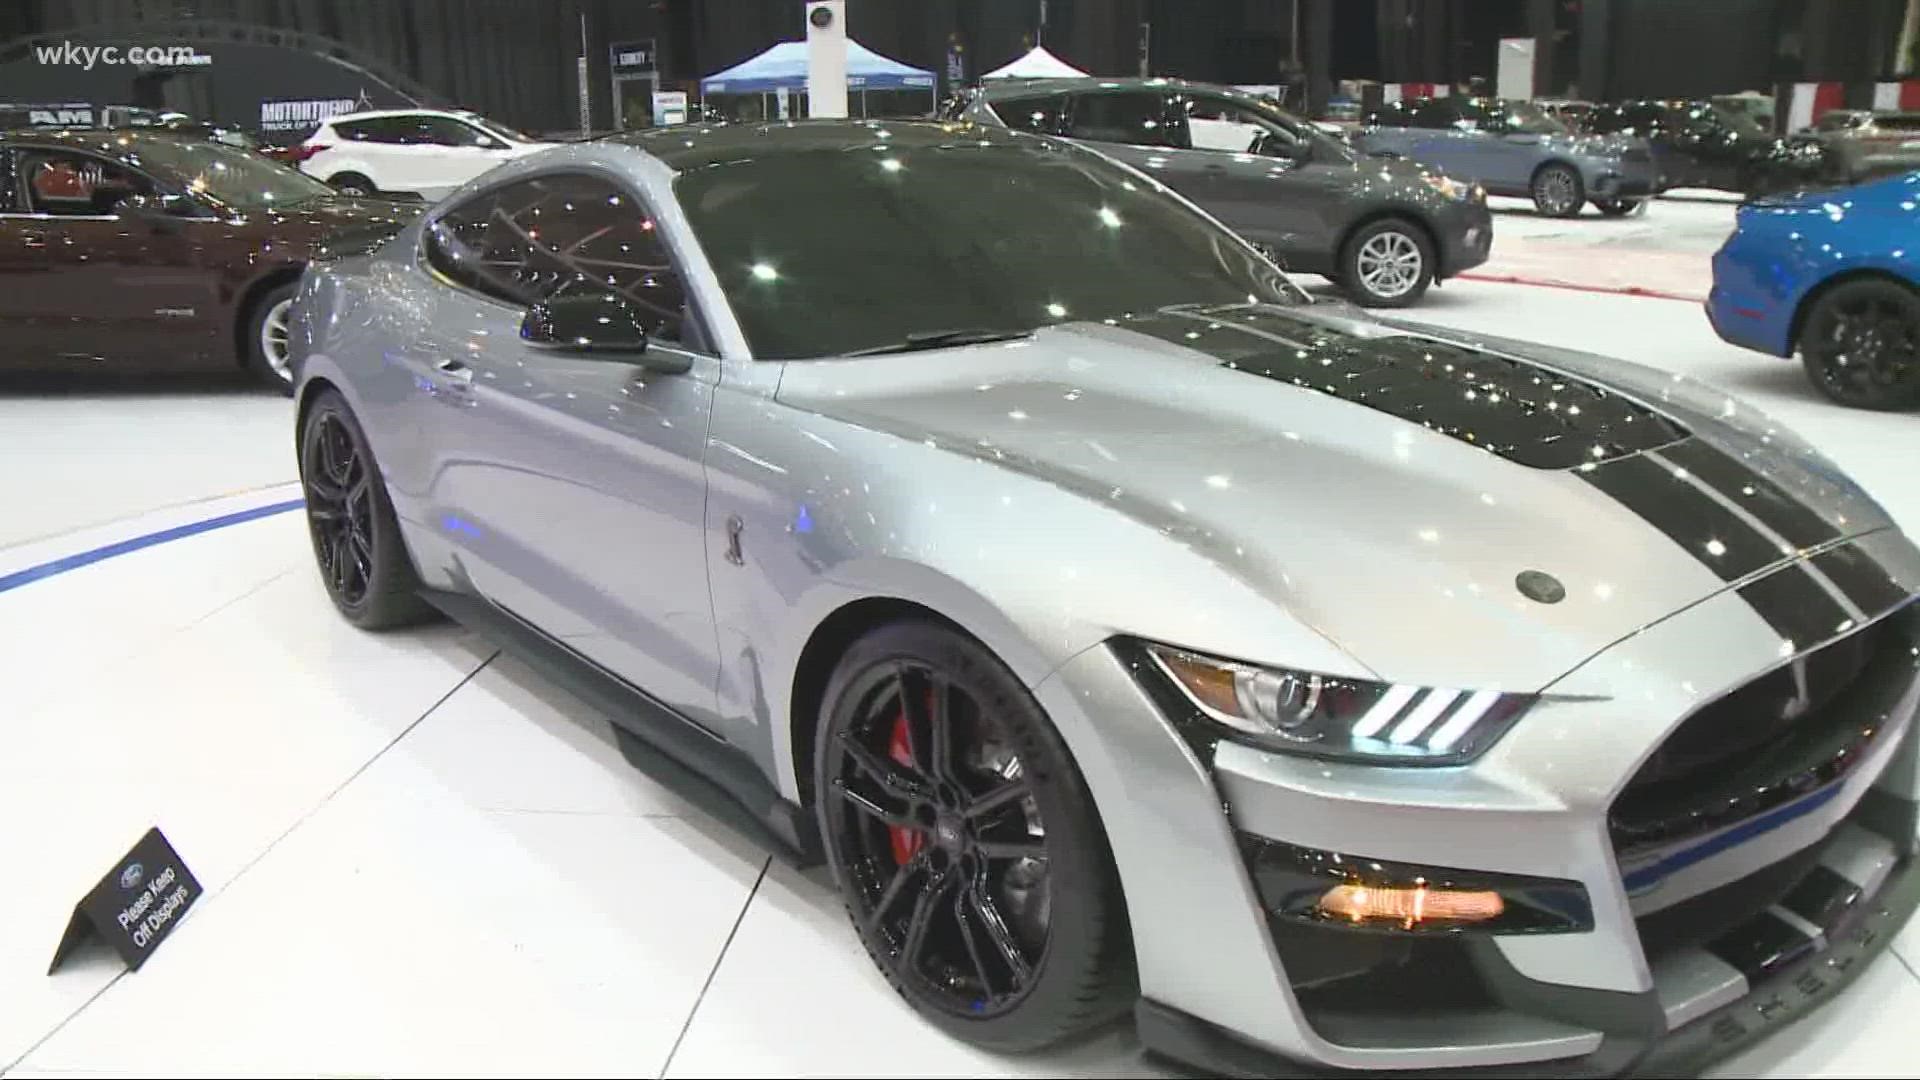 The Cleveland Auto Show is making its return to the I-X Center from Feb. 25 through March 6. Here's a preview of what you can expect at this year's event.